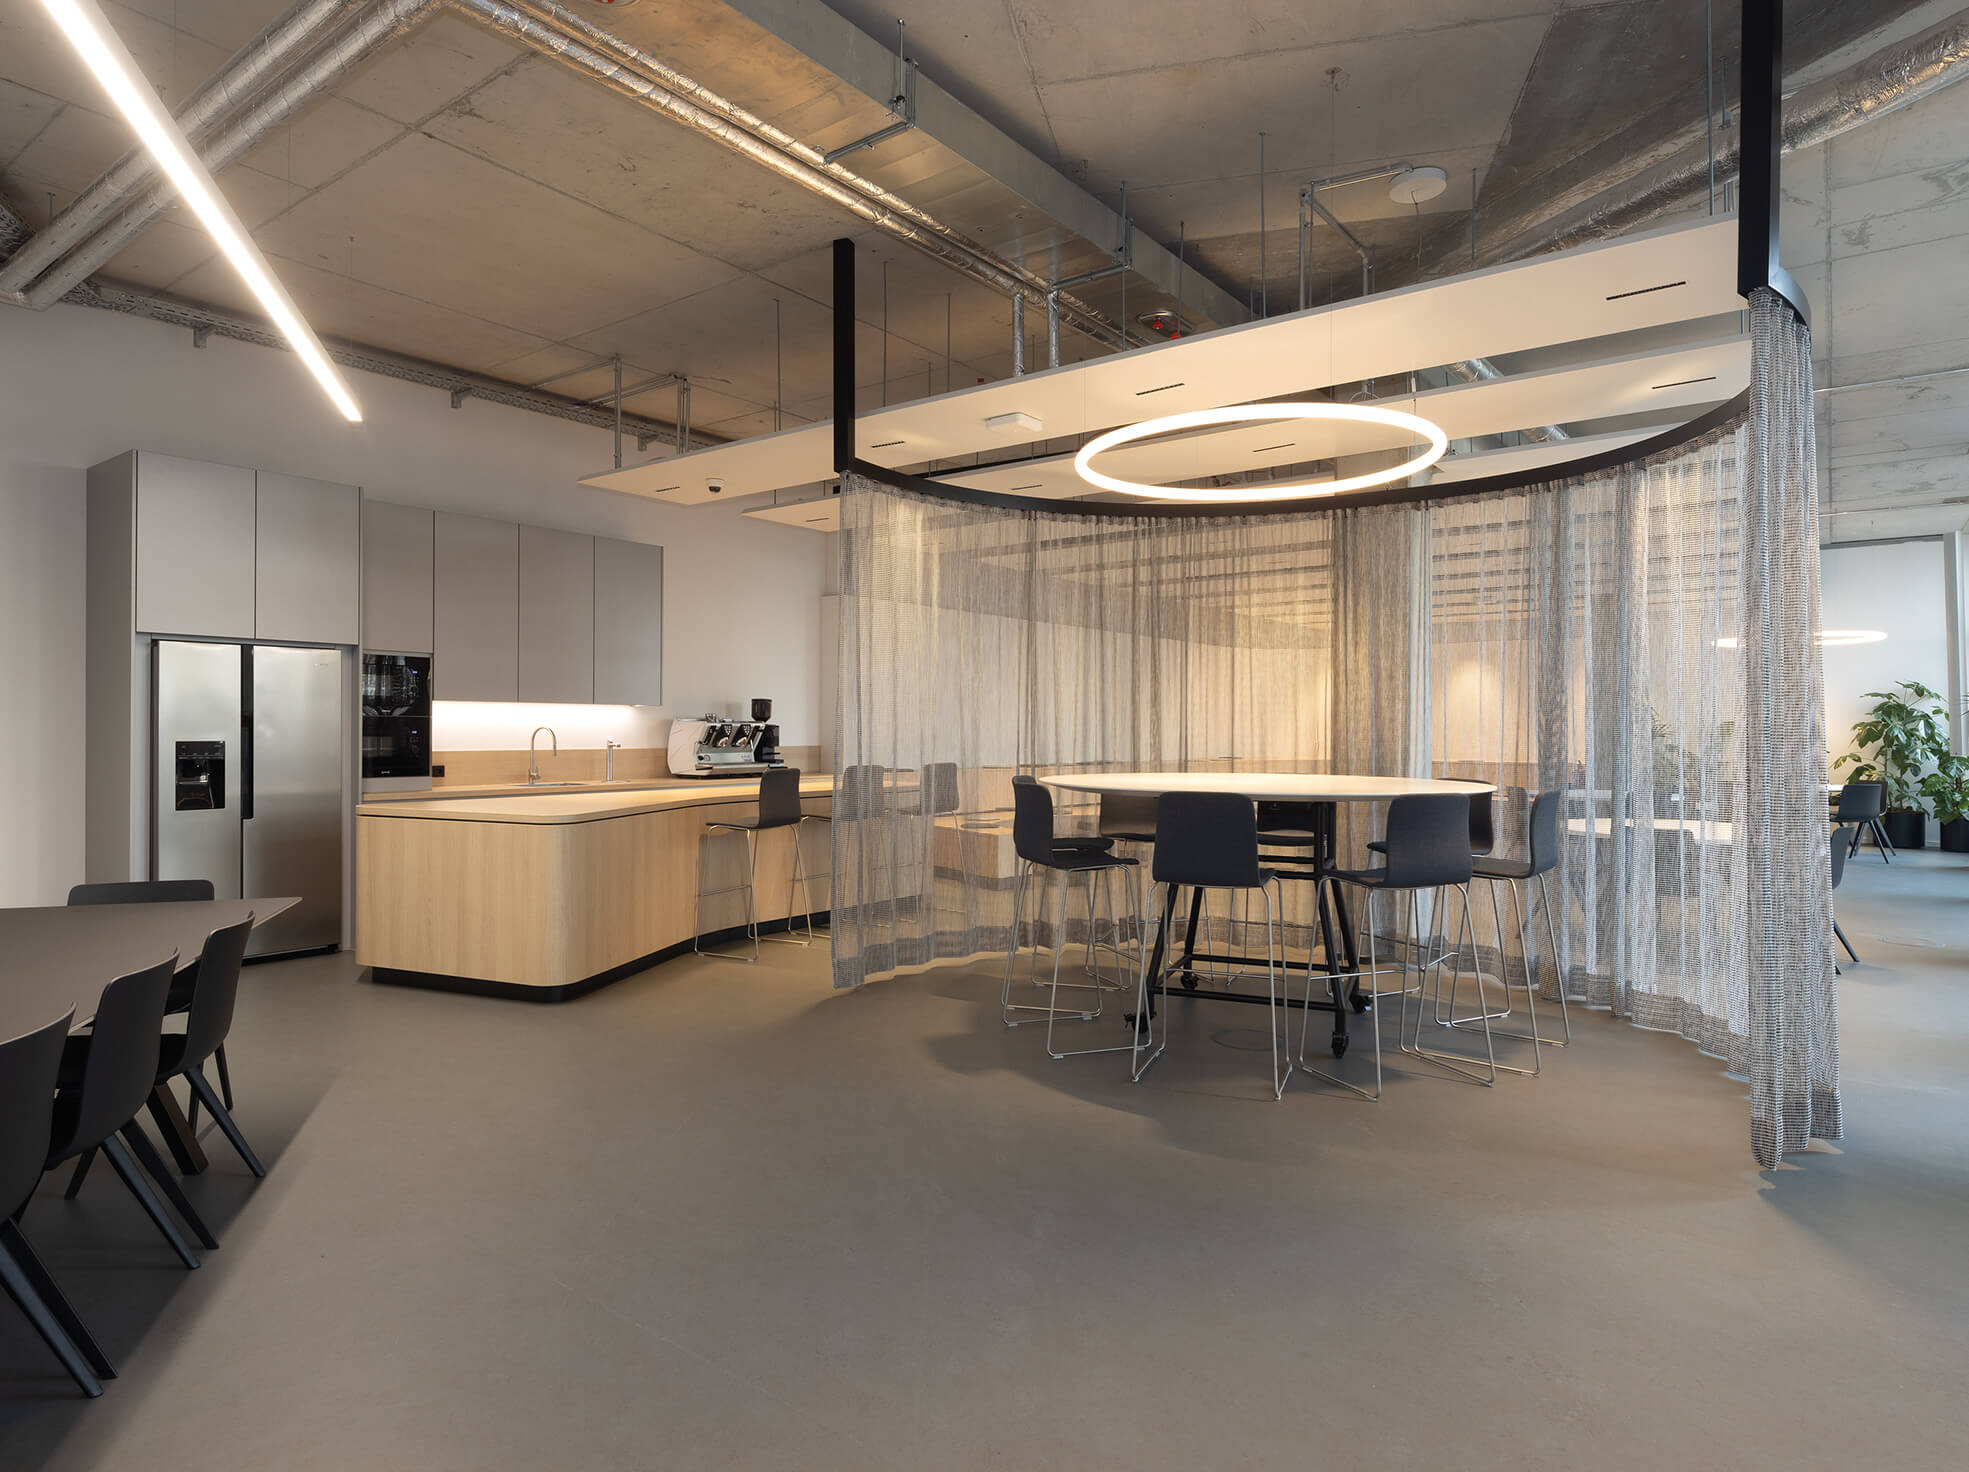 Modern office lounges for employees realised by general contractor Display International.